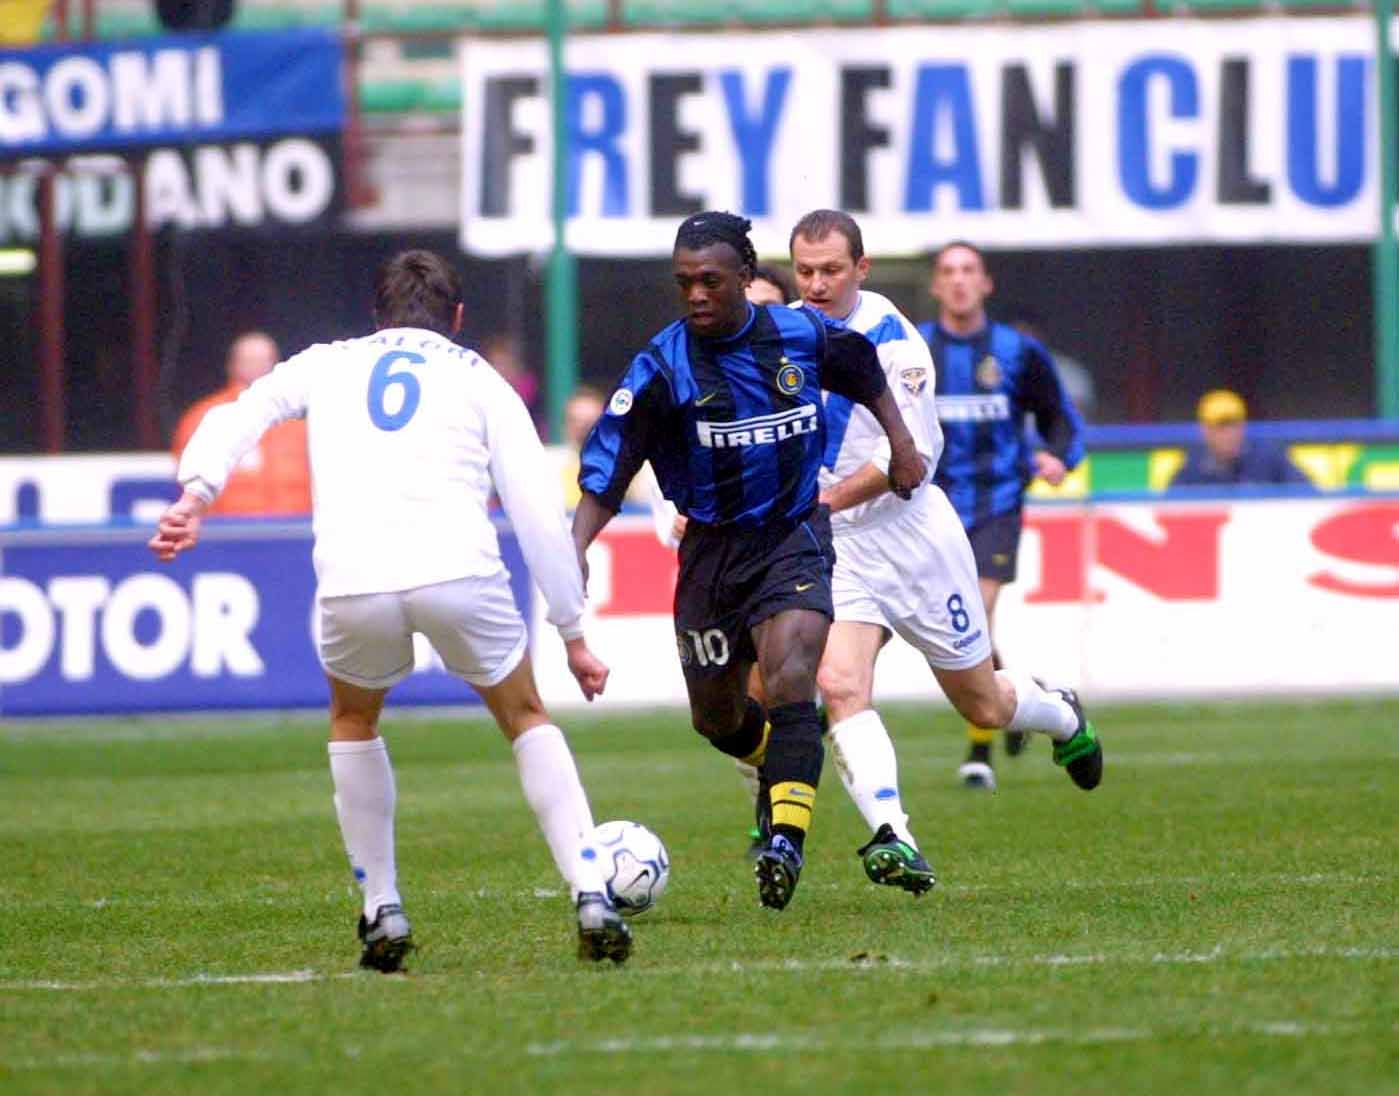 <p>                     Clarence Seedorf is better known for his time at AC Milan than at Inter, but the Dutch midfielder spent two and a half years on the blue and black side of the derby divide before moving to their city rivals in 2002.                   </p>                                      <p>                     Seedorf joined Inter from Real Madrid late in 1999 for a fee of just over €24 million and went on to make 93 appearances for the Nerazzurri, scoring 14 goals. He went on to spend the next decade at AC MIlan after moving in exchange for Francesco Coco in 2002.                   </p>